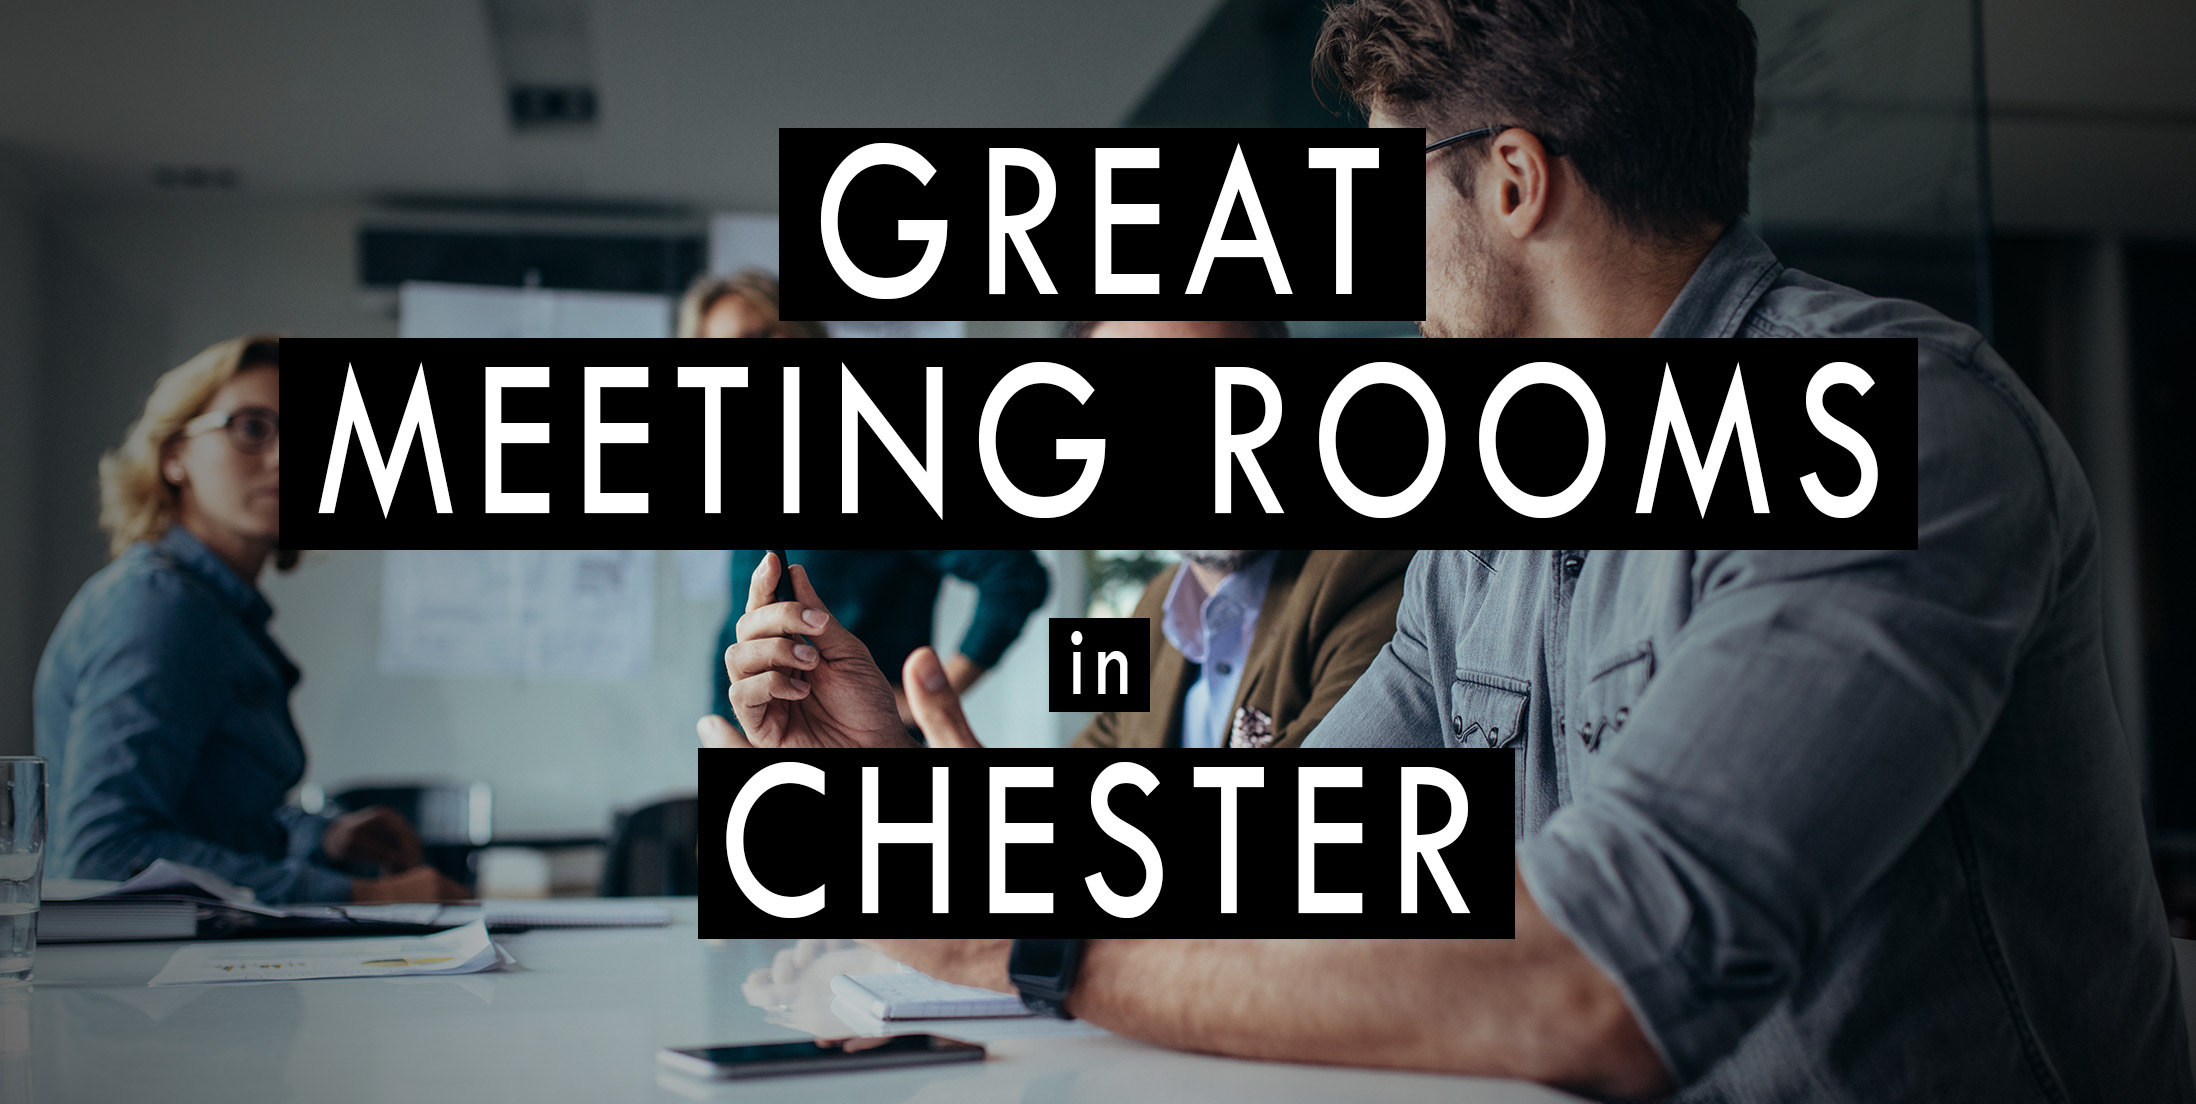 Great Meeting Rooms in Chester